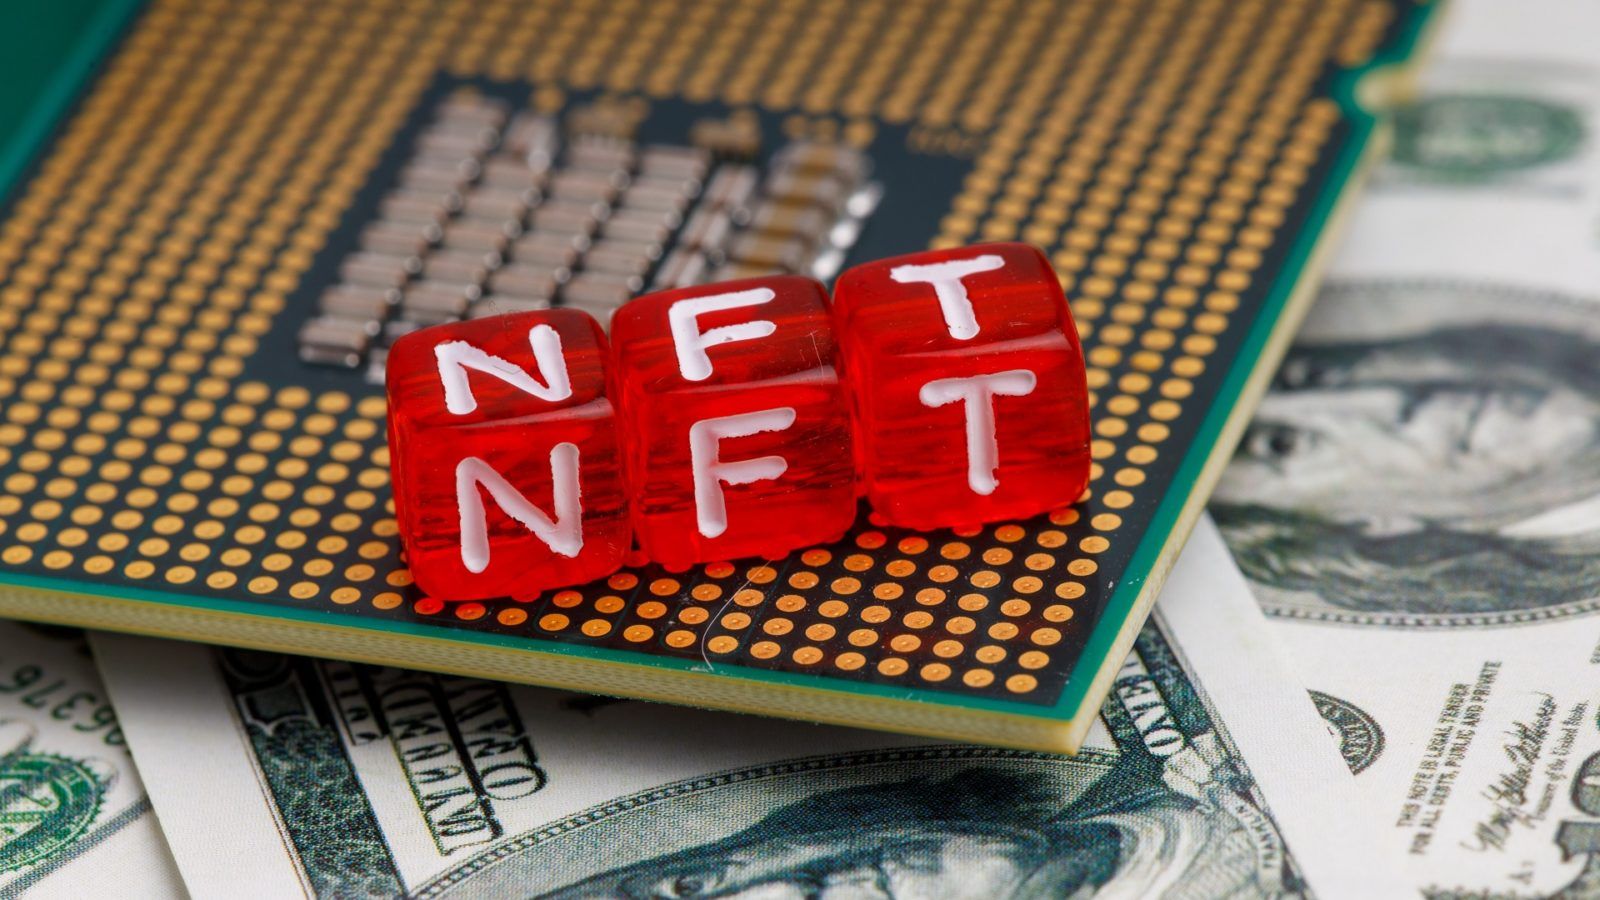 10 NFT terms you should know before you start collecting or trading